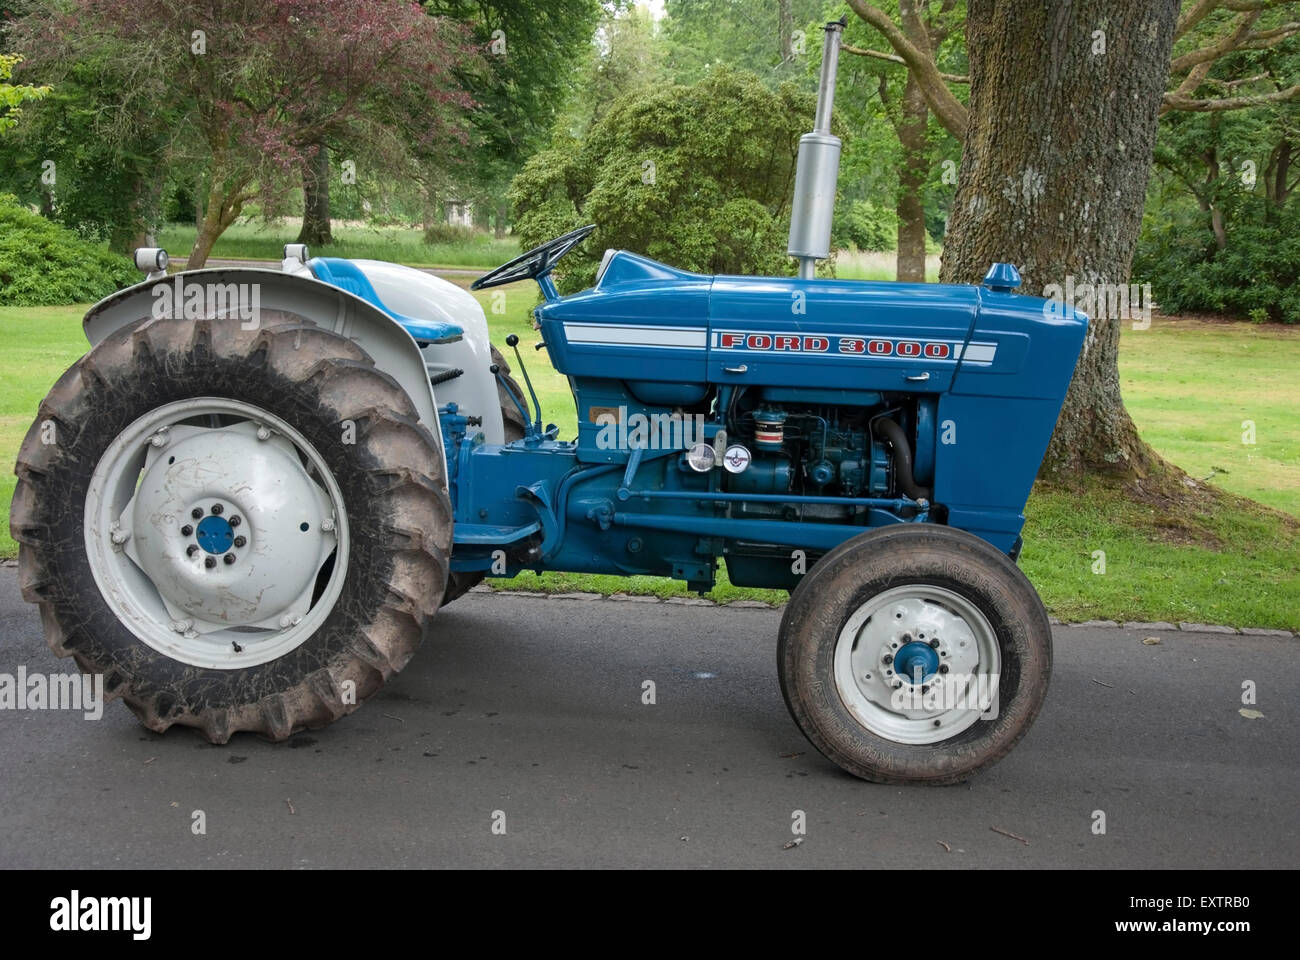 1969 Blue & White Ford 3000 Series Farm Tractor Stock Photo